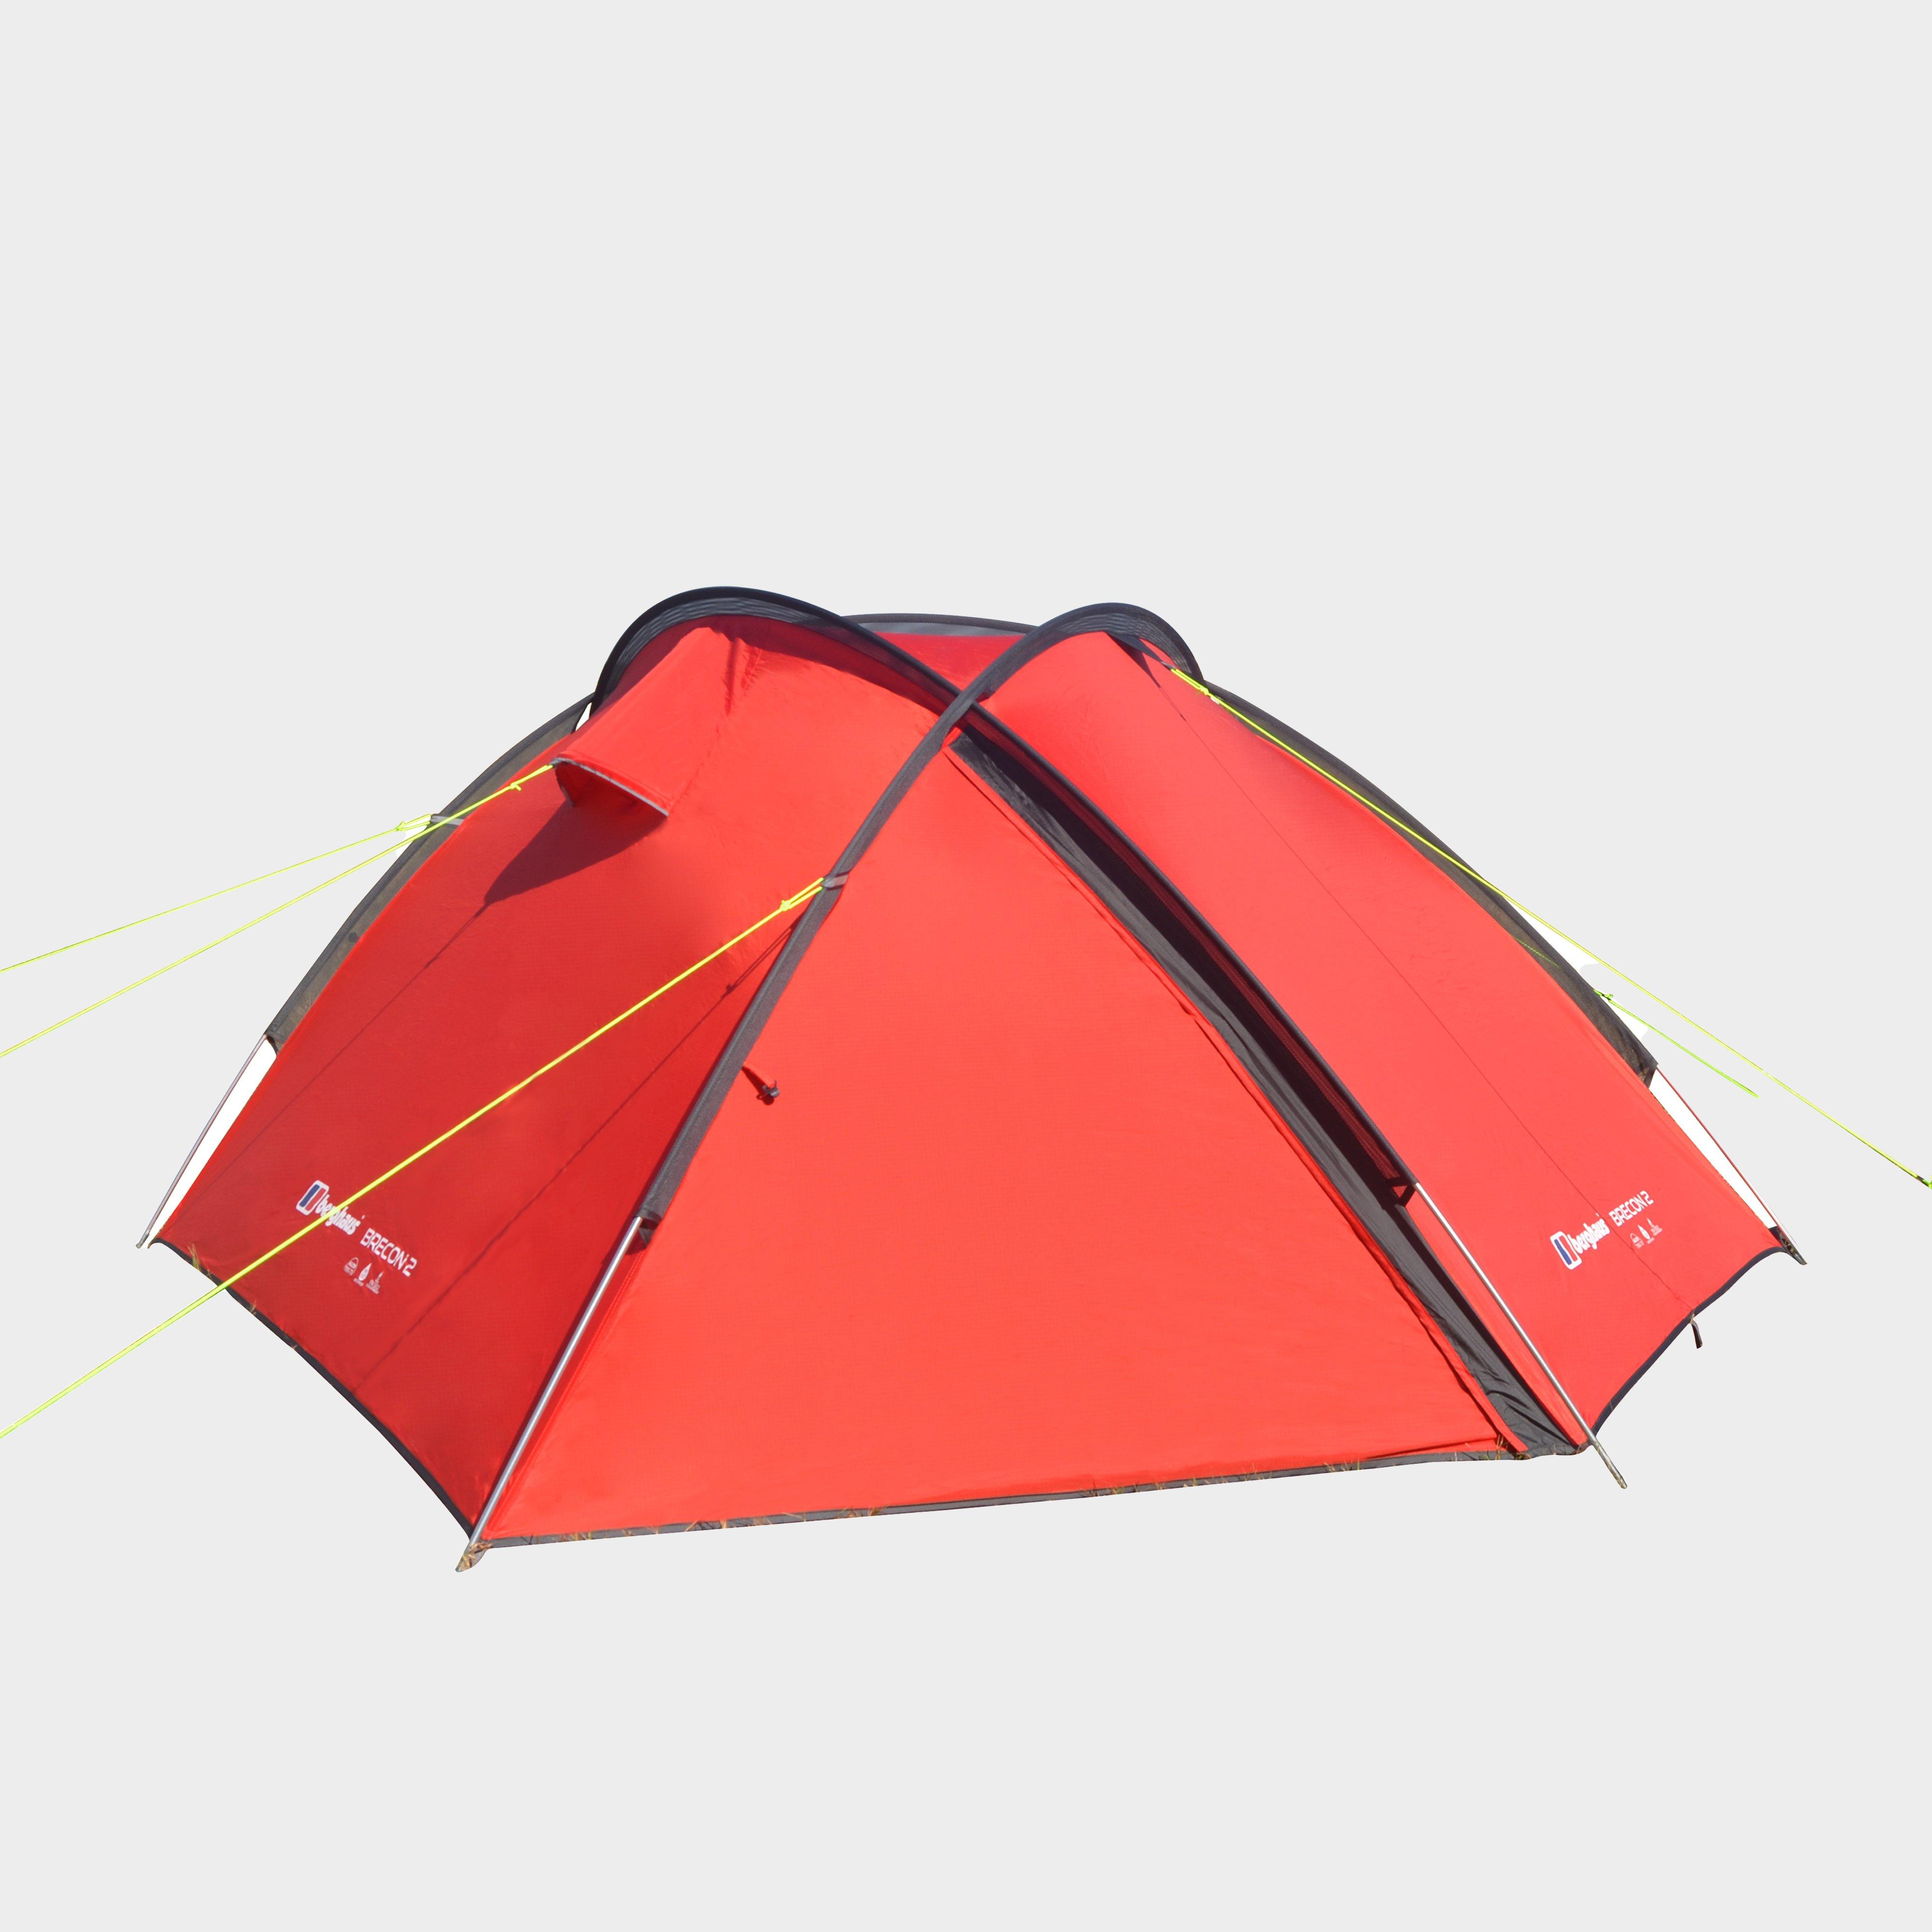  Berghaus Brecon 2 Tent, Red